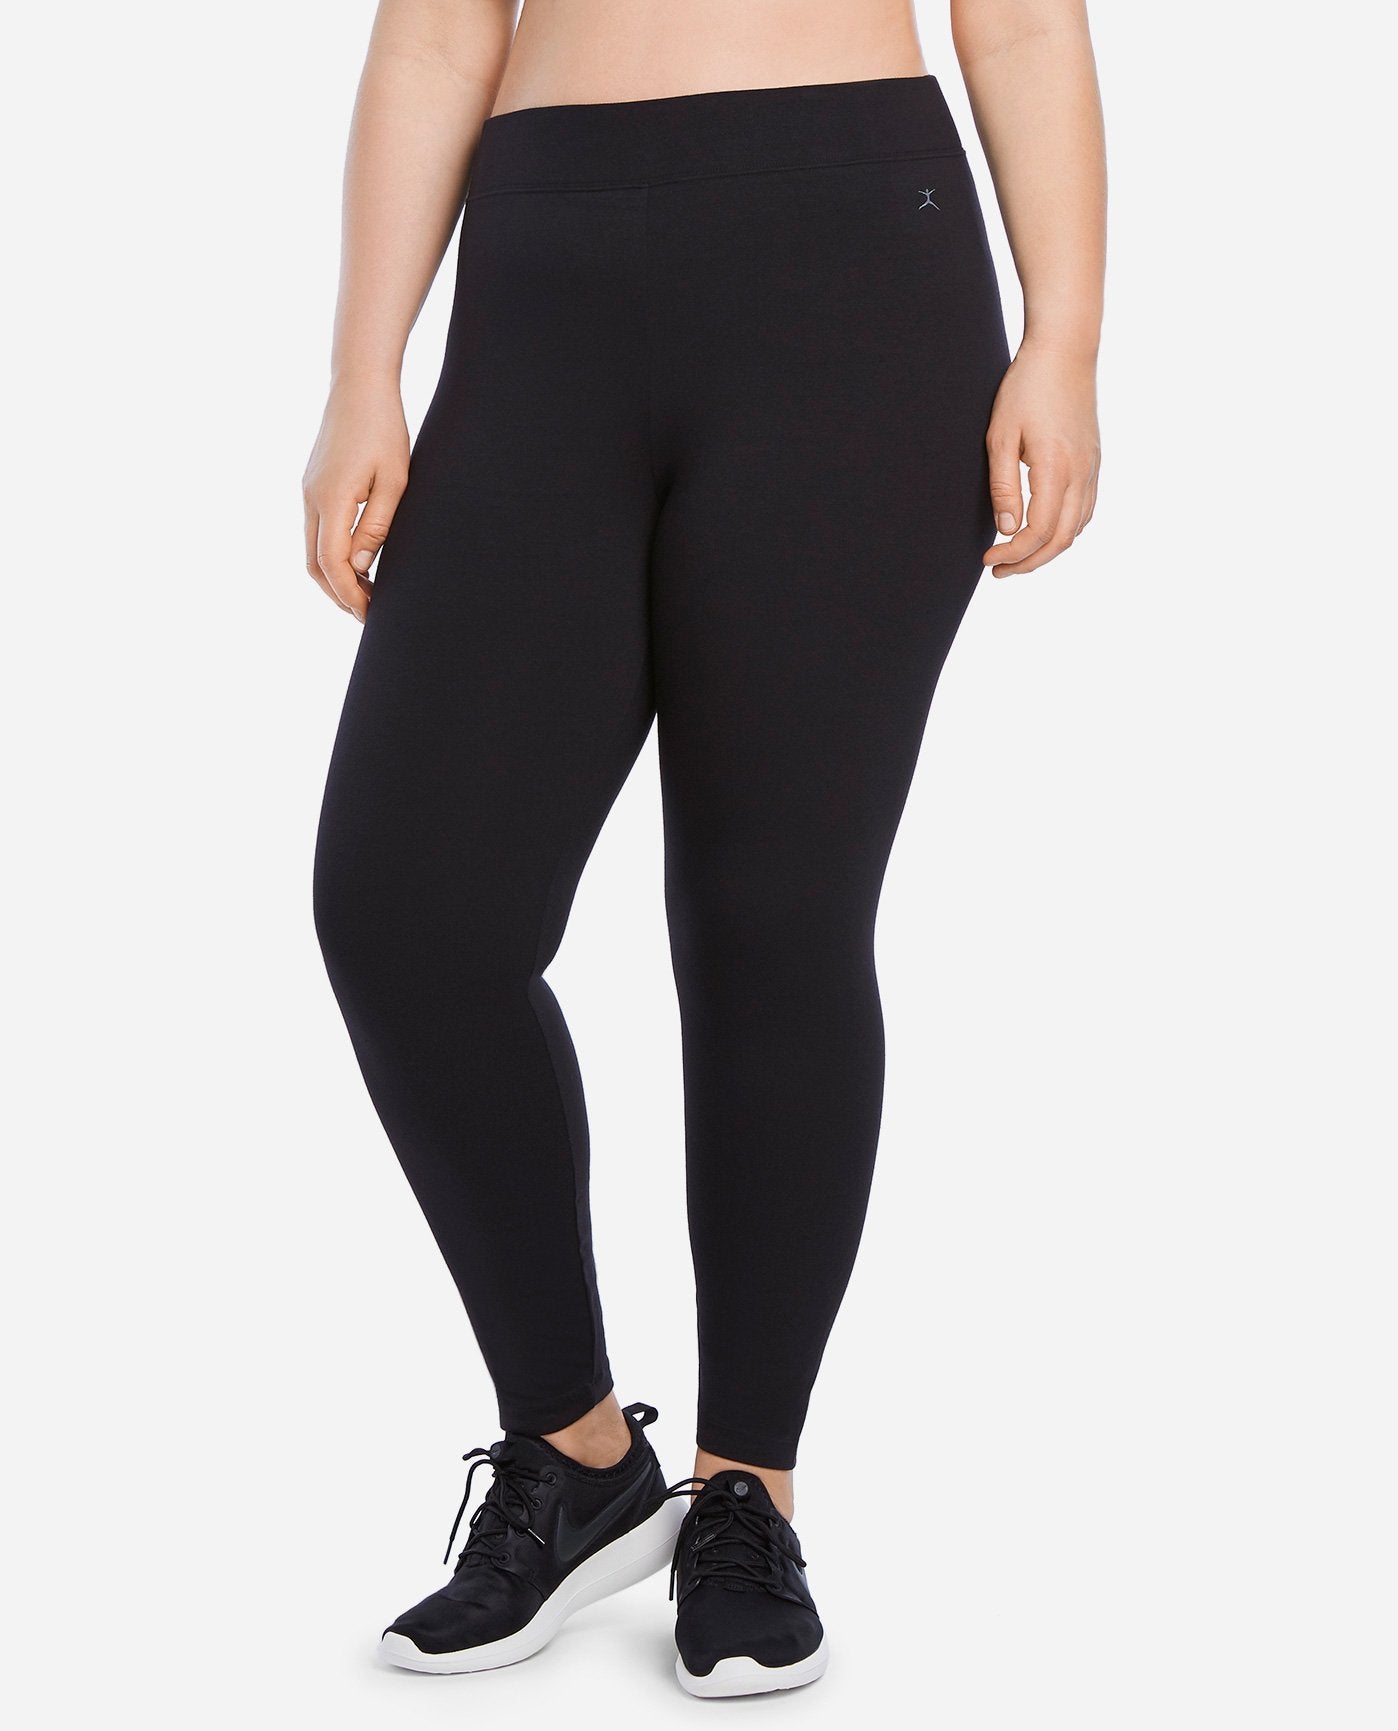 Danskin Now Juniors' High Waisted Leggings with Cut Out Knee